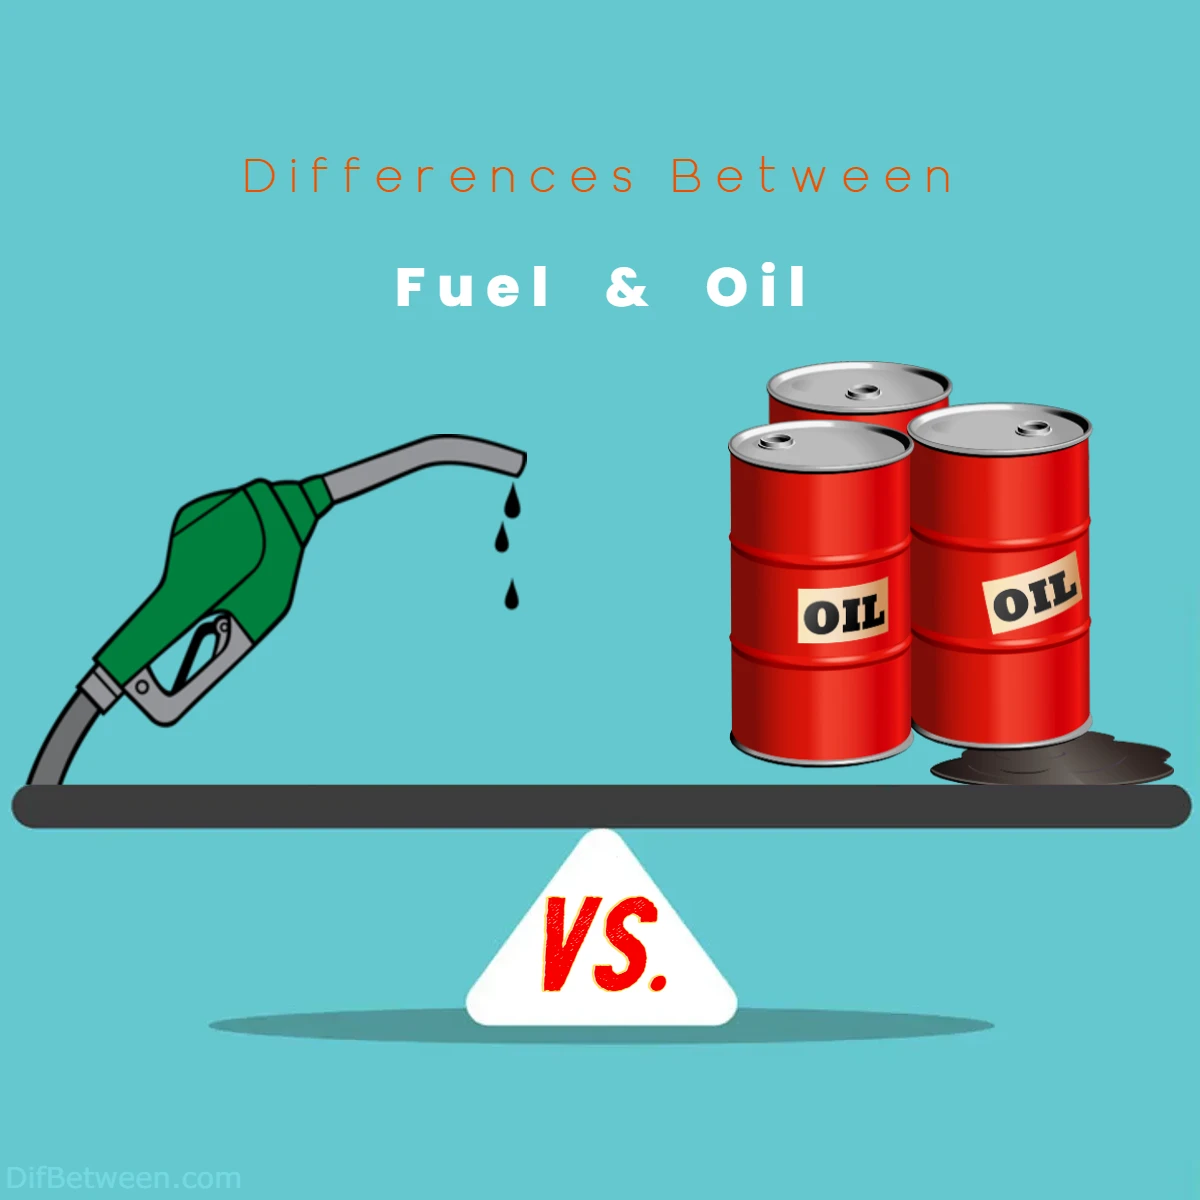 Differences Between Fuel vs Oil